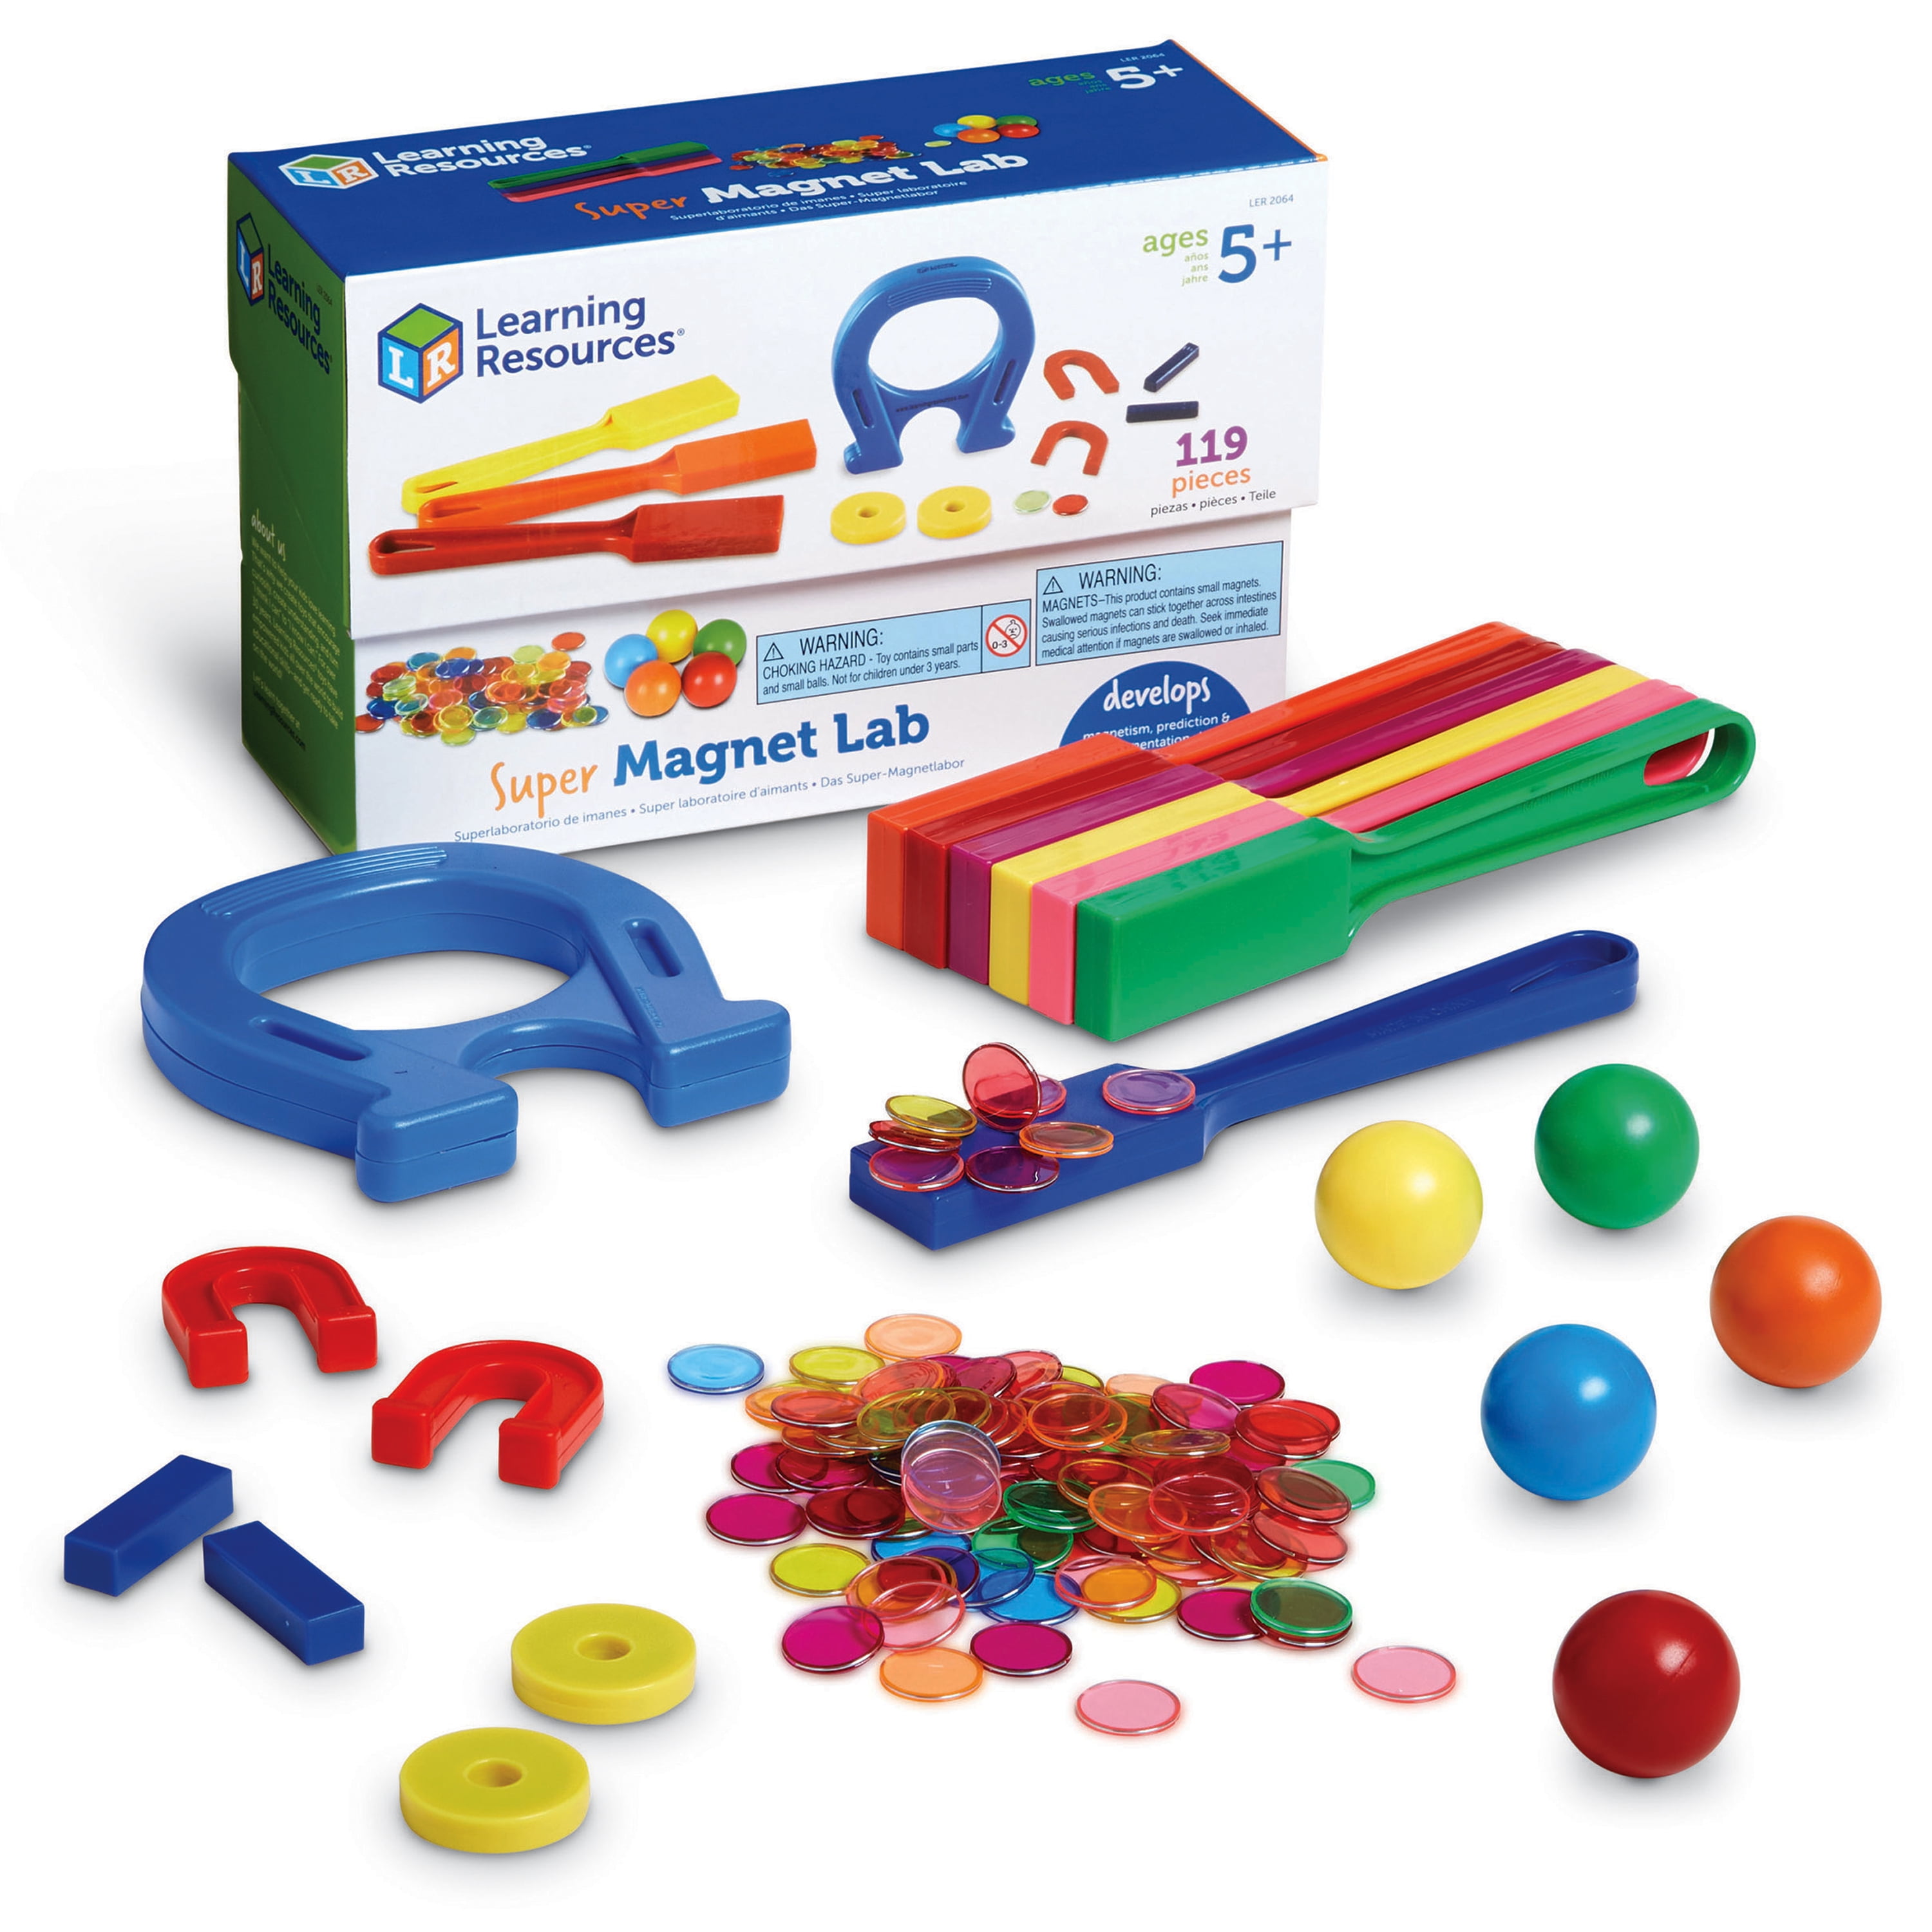 Kidz Labs MAGNETIC SCIENCE MODEL KIT EXPERIMENT Educational Science Toy 4M NEW 